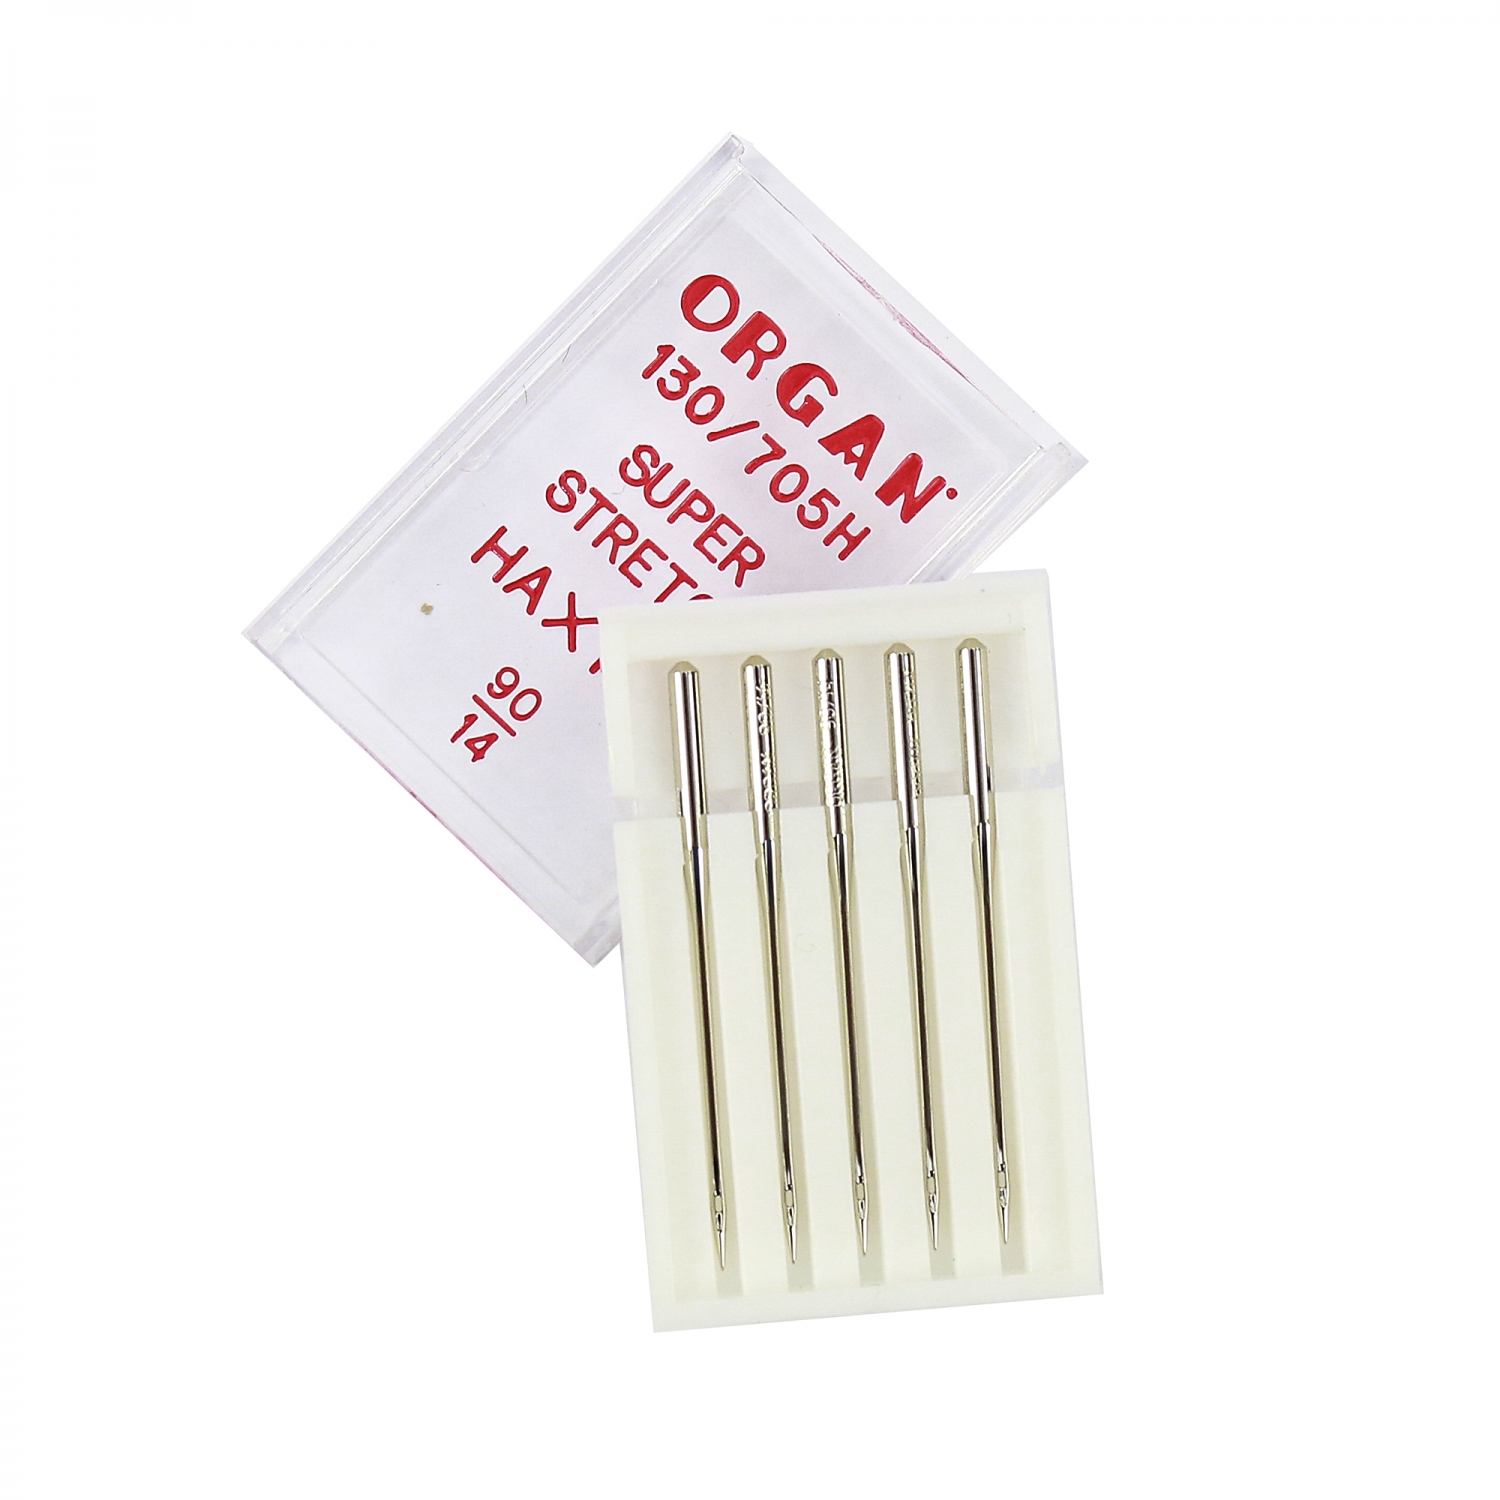 Household Sewing Jeans Machine Needles (5 pc/box)